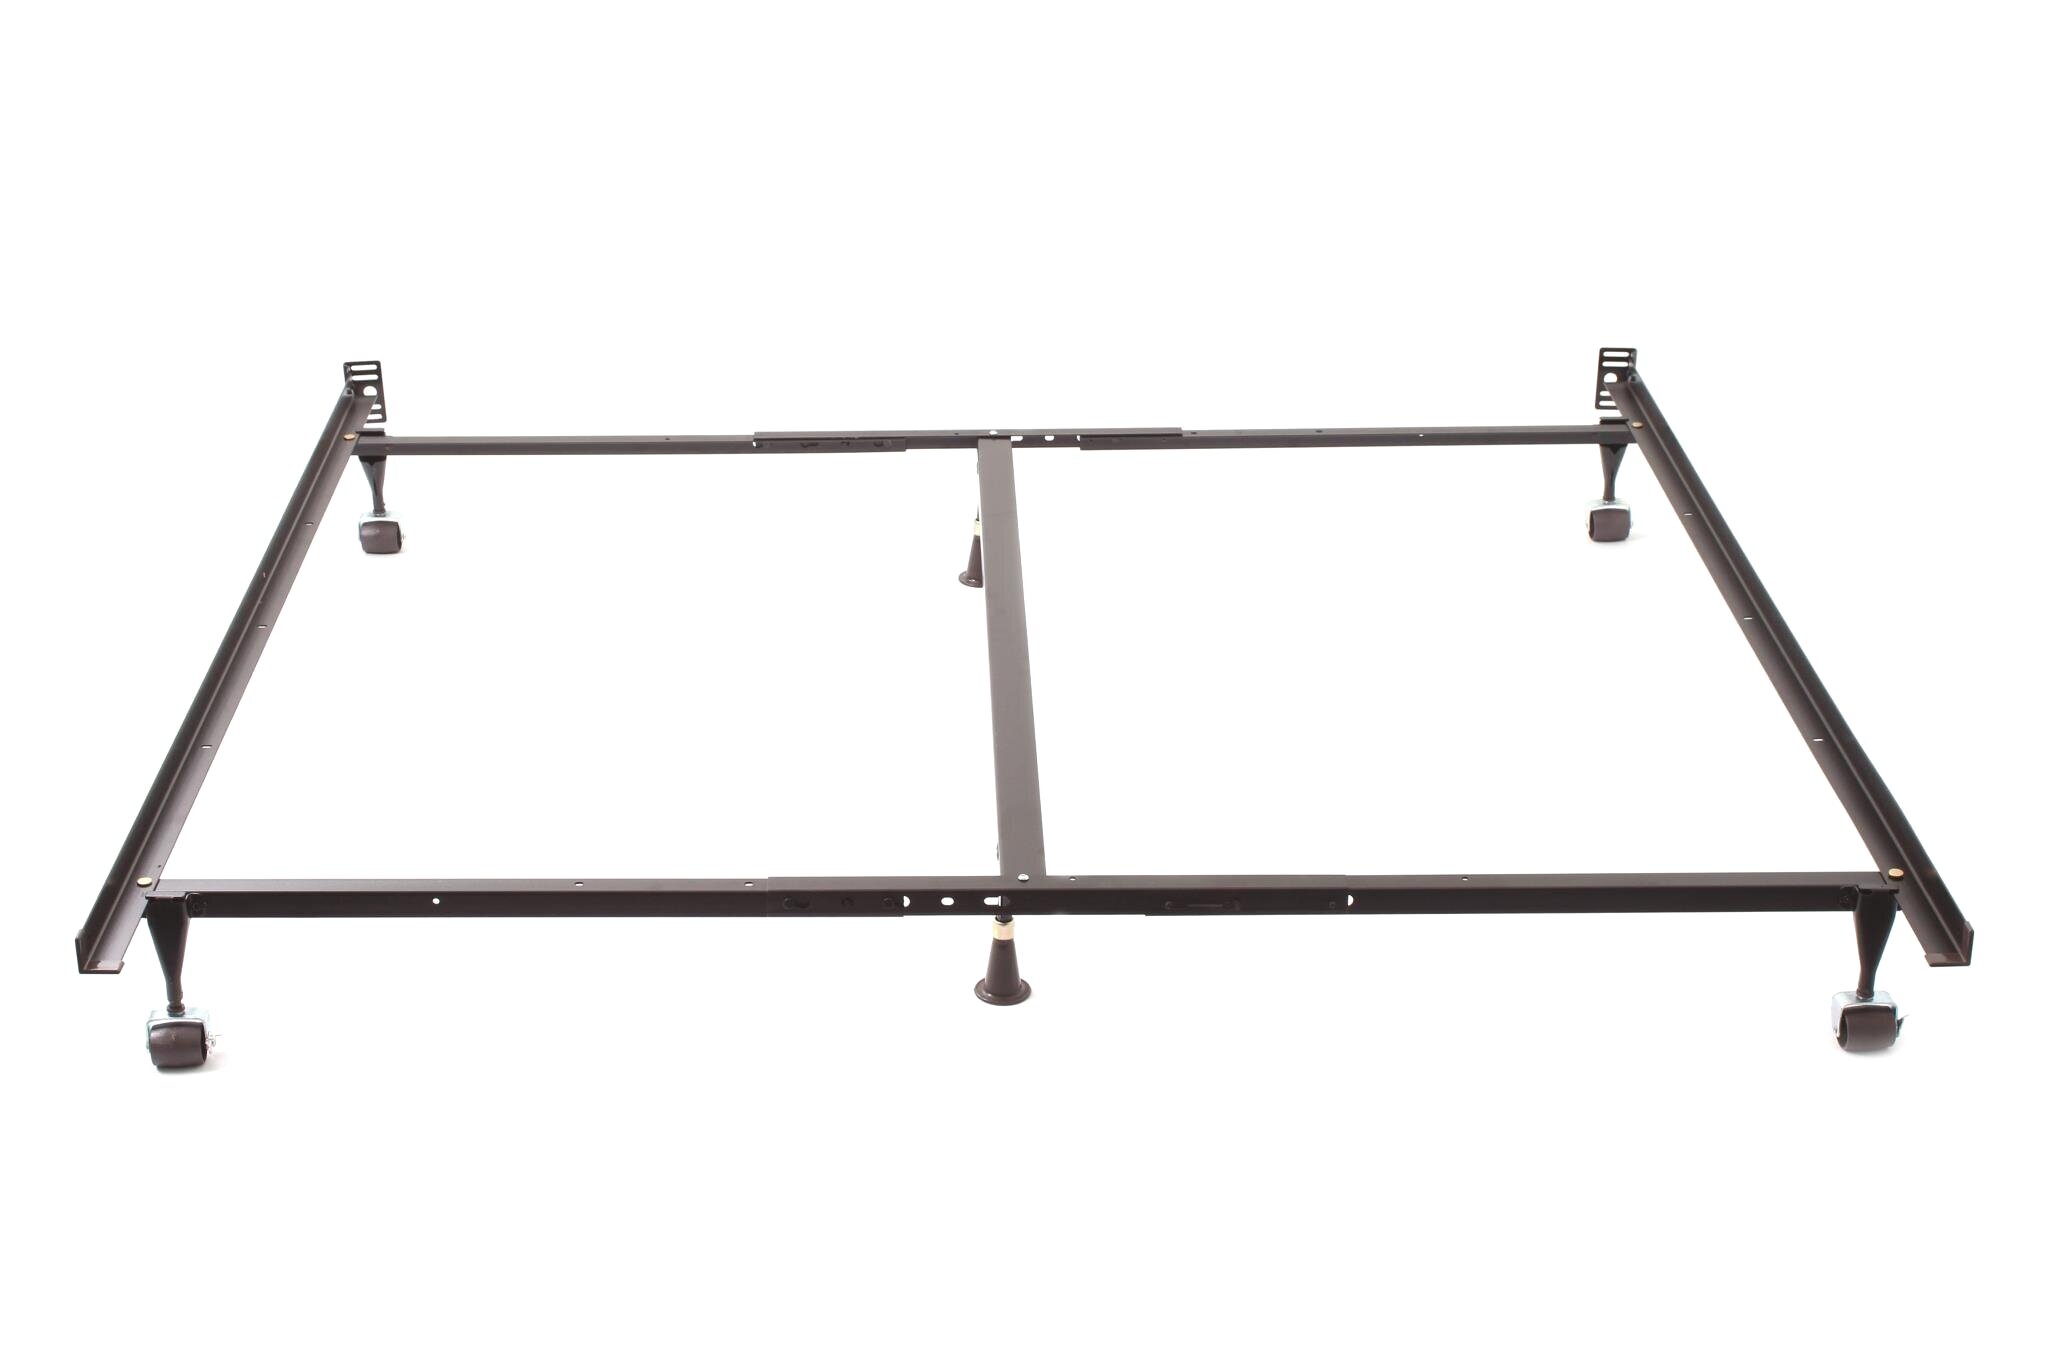 Steel Bed Frames Bargain Sleep, How Much Does A Bed Frame Cost